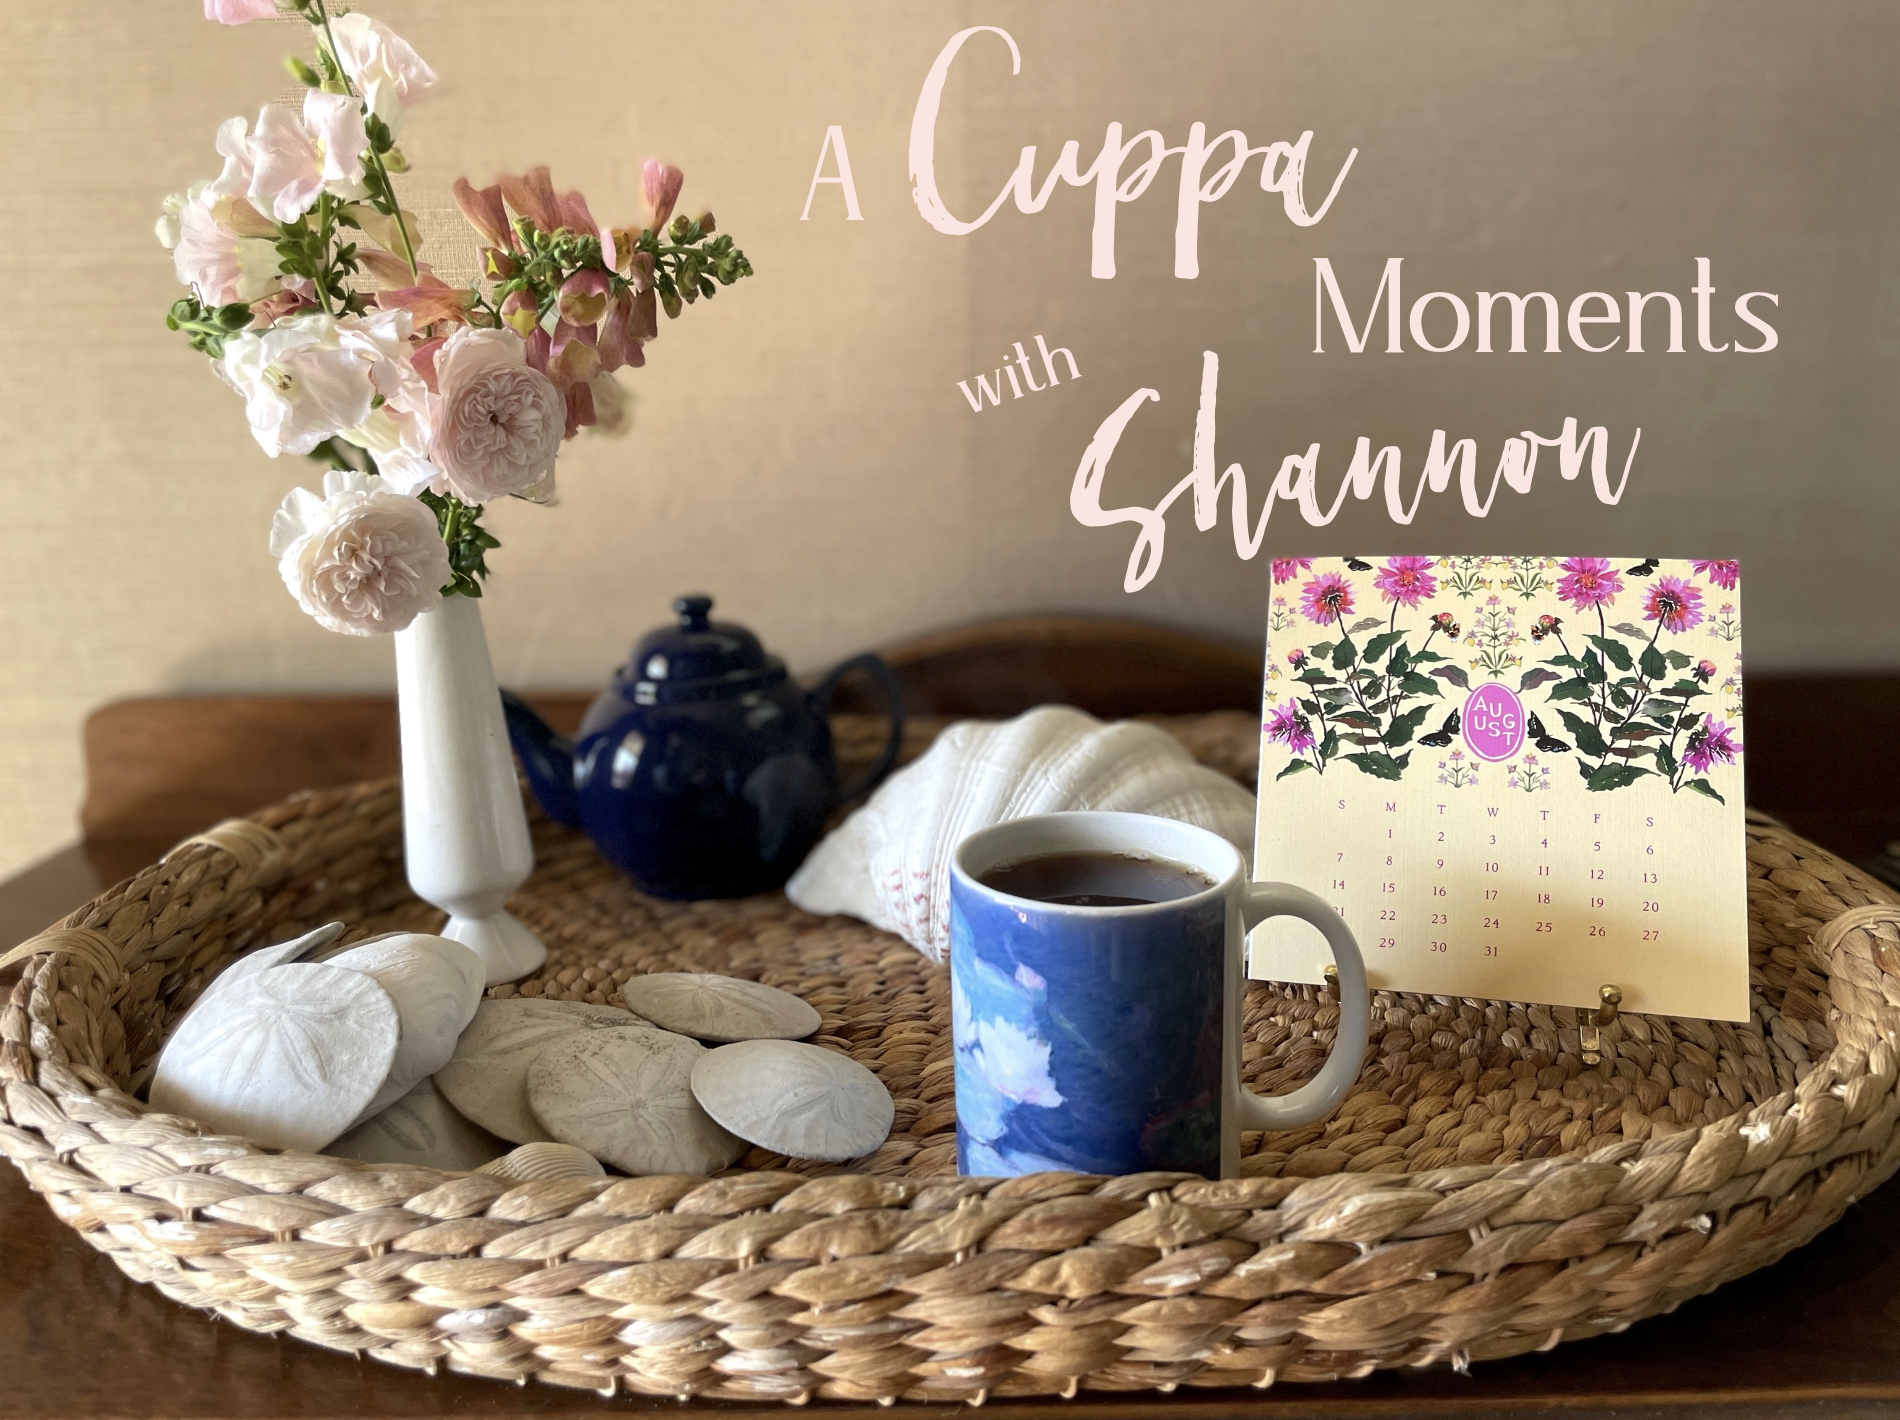 A Cuppa Moments w/Shannon, August 2022